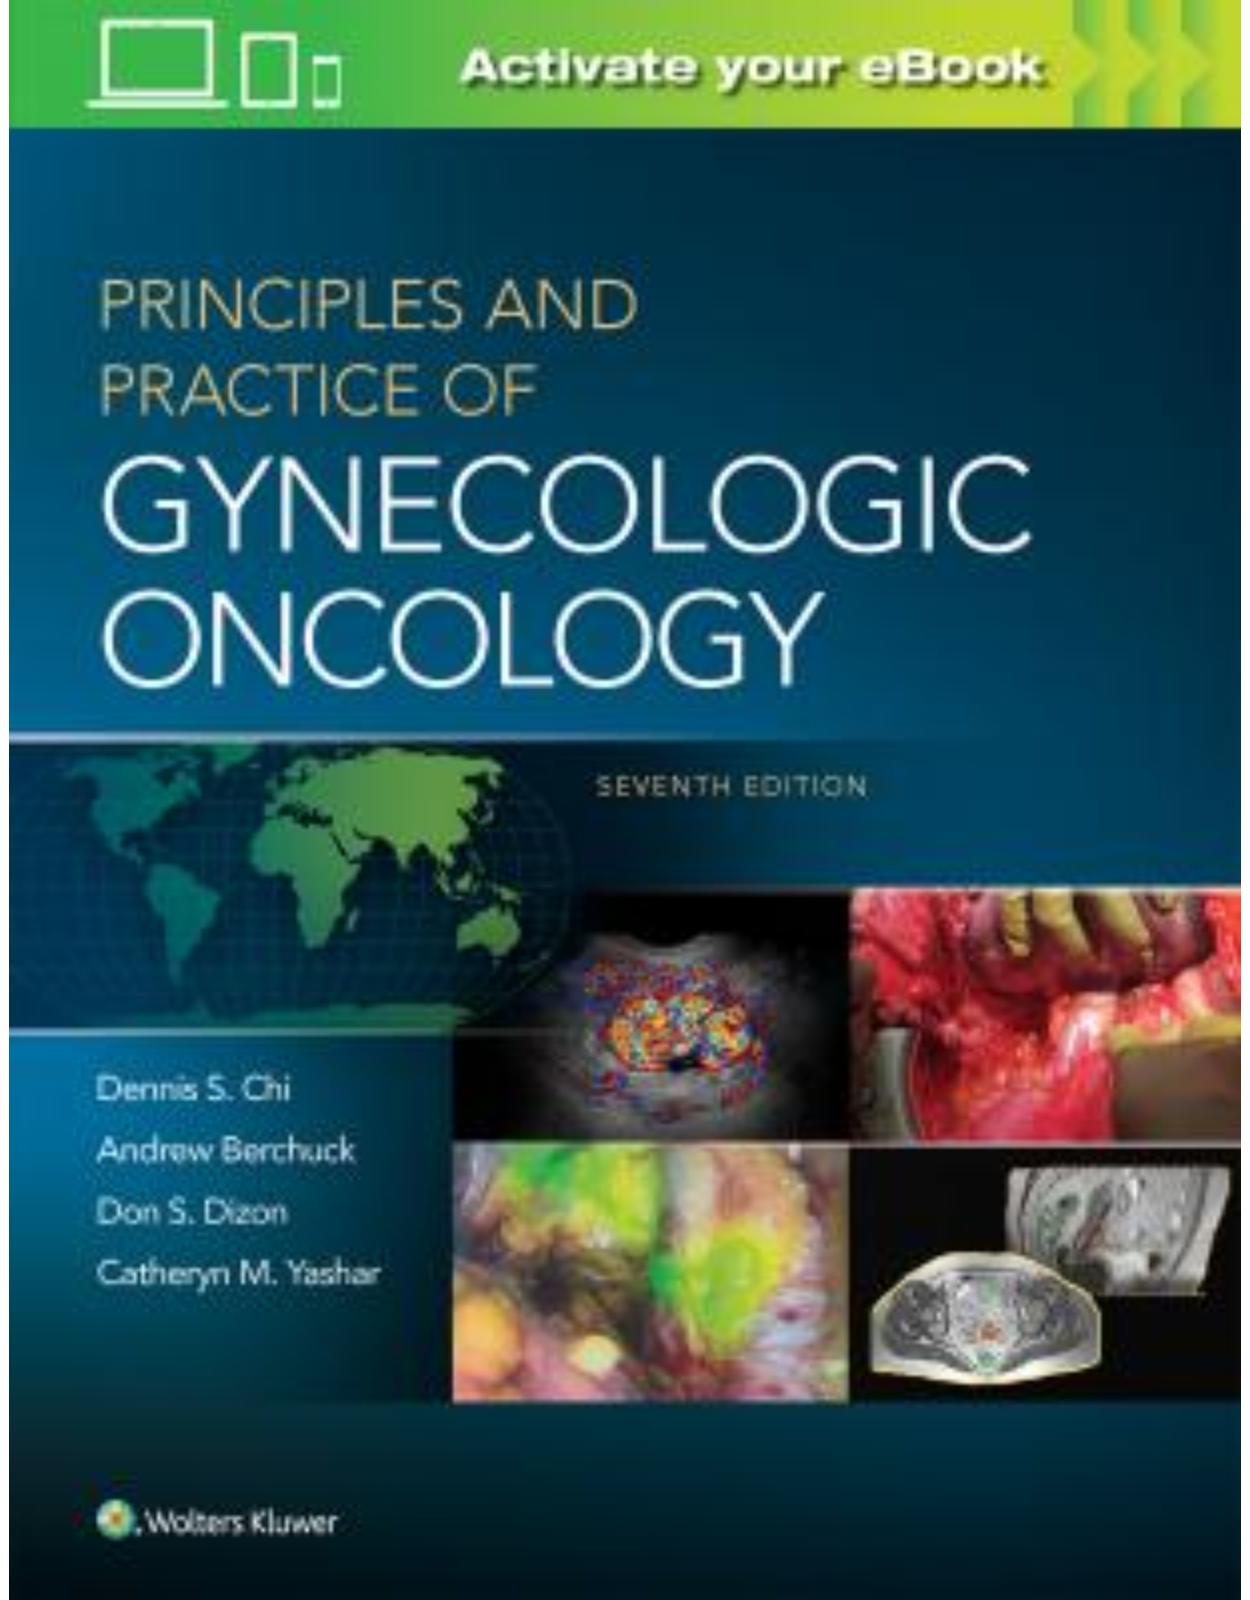 Principles and Practice of Gynecologic Oncology, 7e 